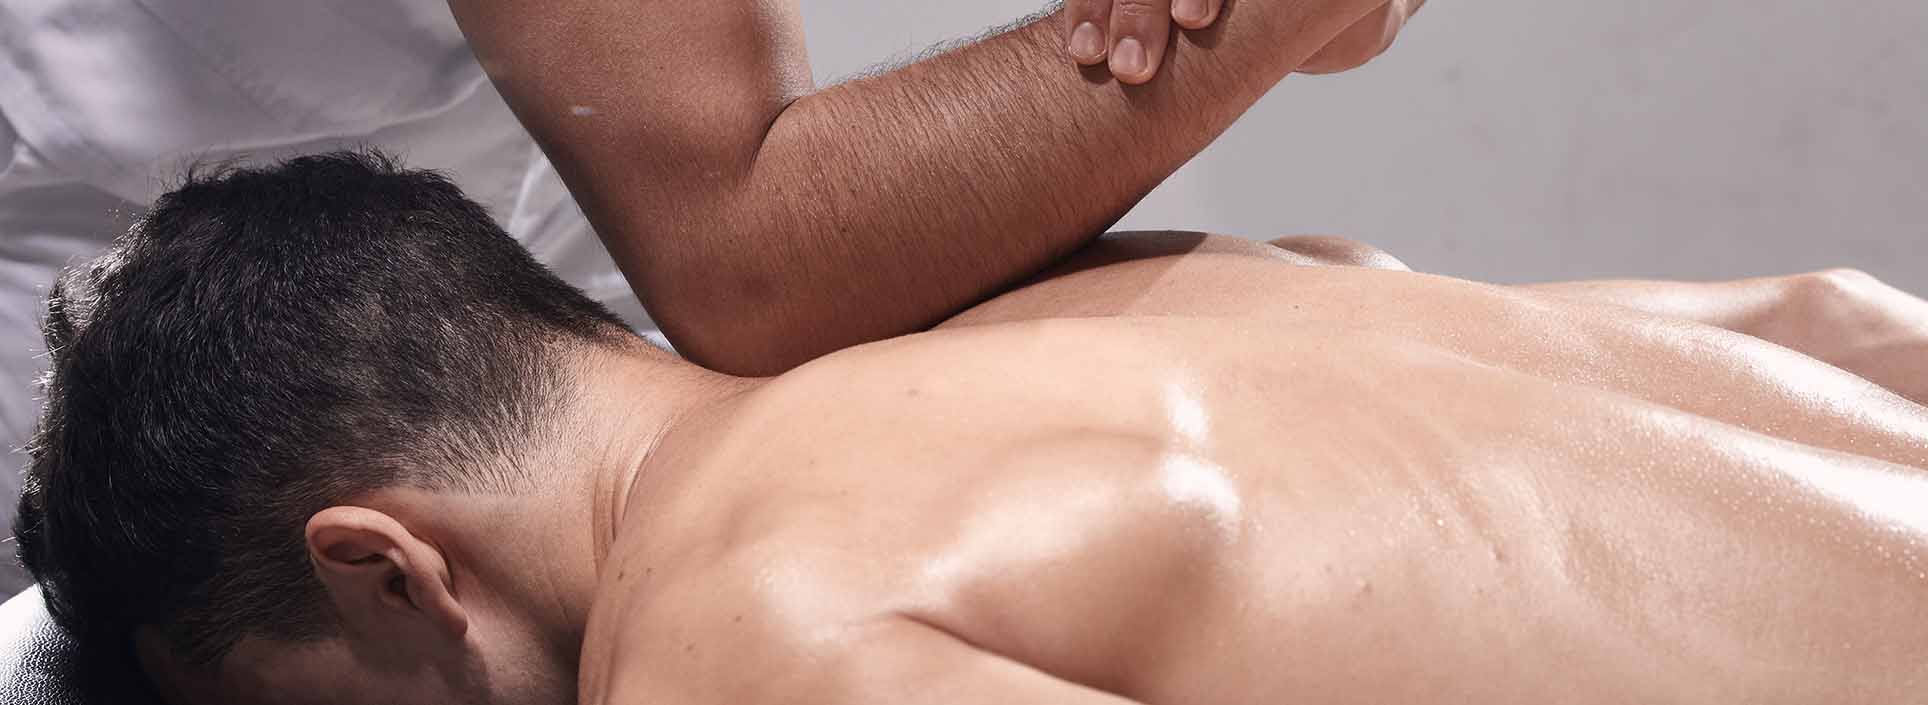 Physiotherapist sports-massage to patient